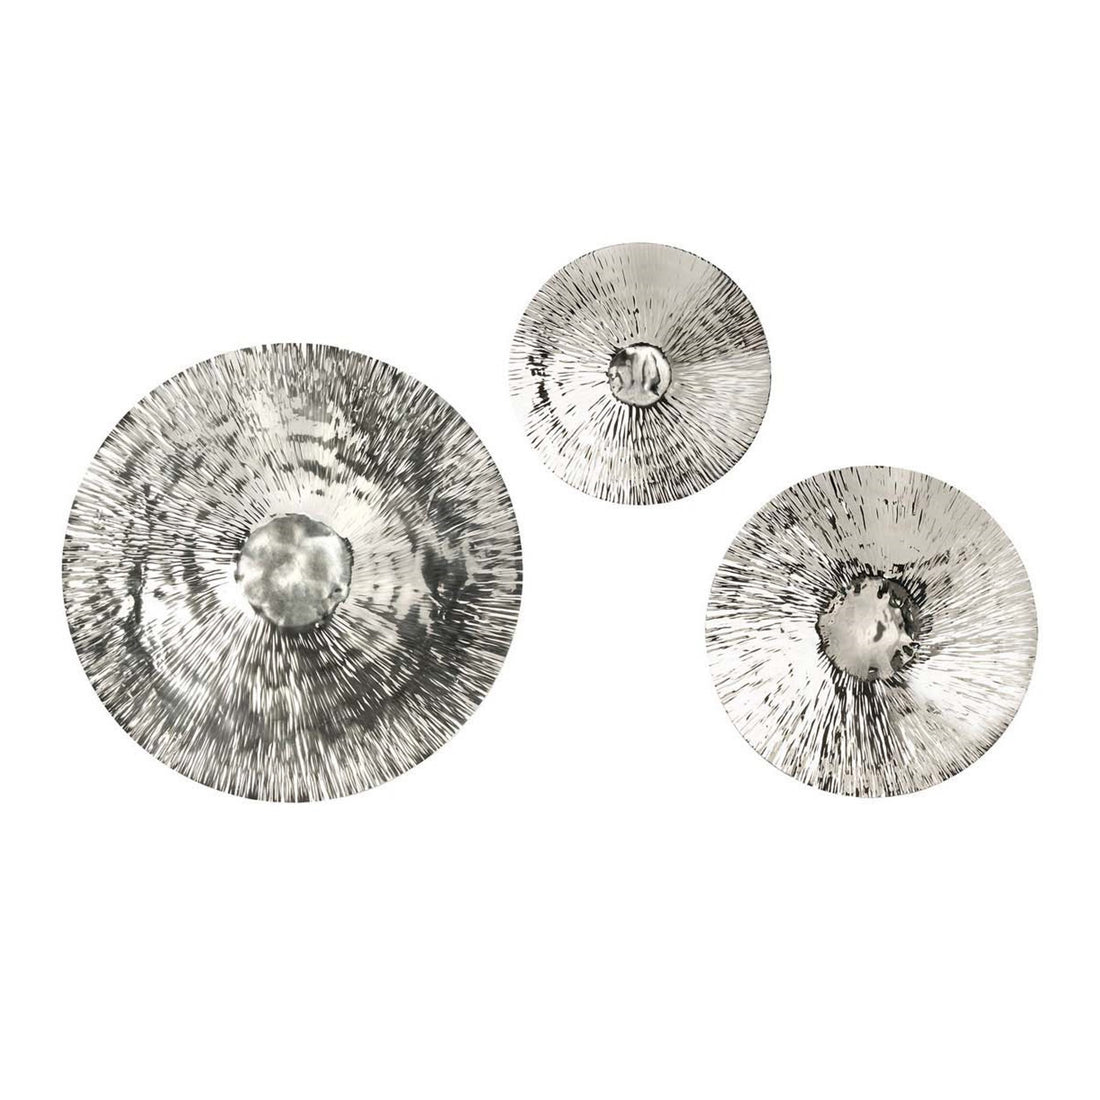 Silver Textured Oversized Disc, Wall Decor for Living silver-stainless steel